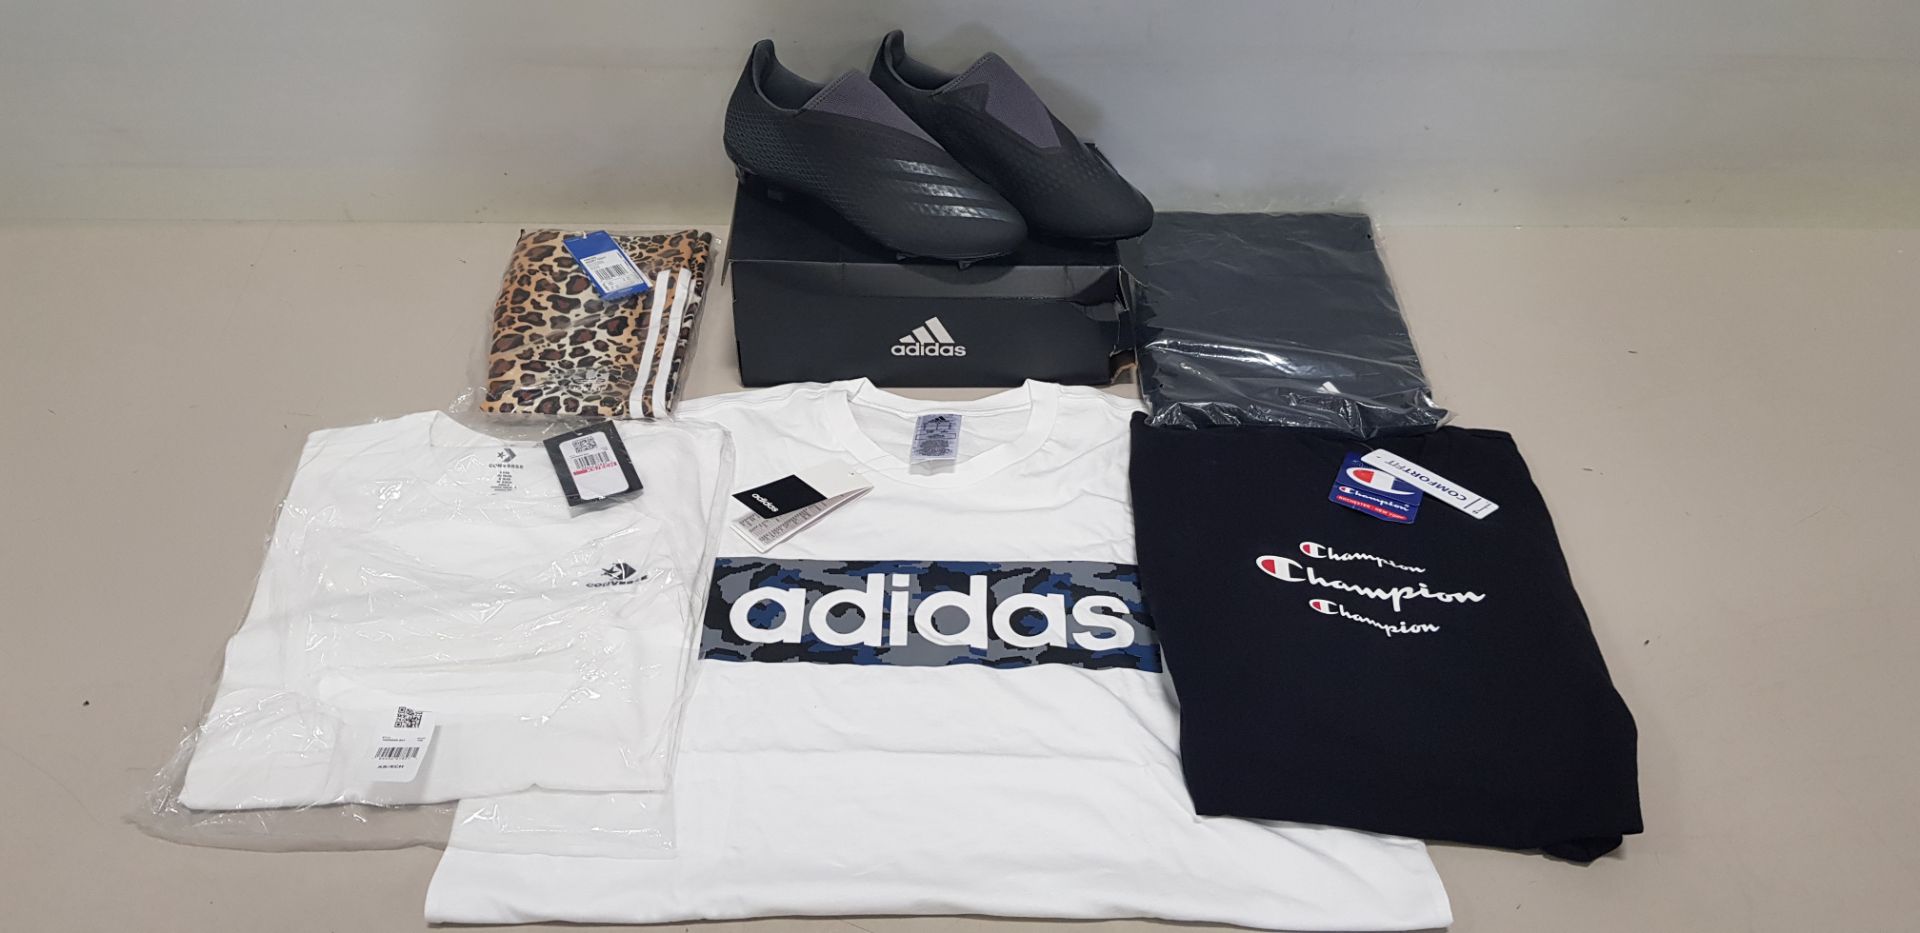 9 PC MIX LOT TO INCLUDE 2 X ADIDAS X GHOASTED FOOTBALL BOOTS ( SIZE 8) - BOXES DAMAGED , CHAMPION